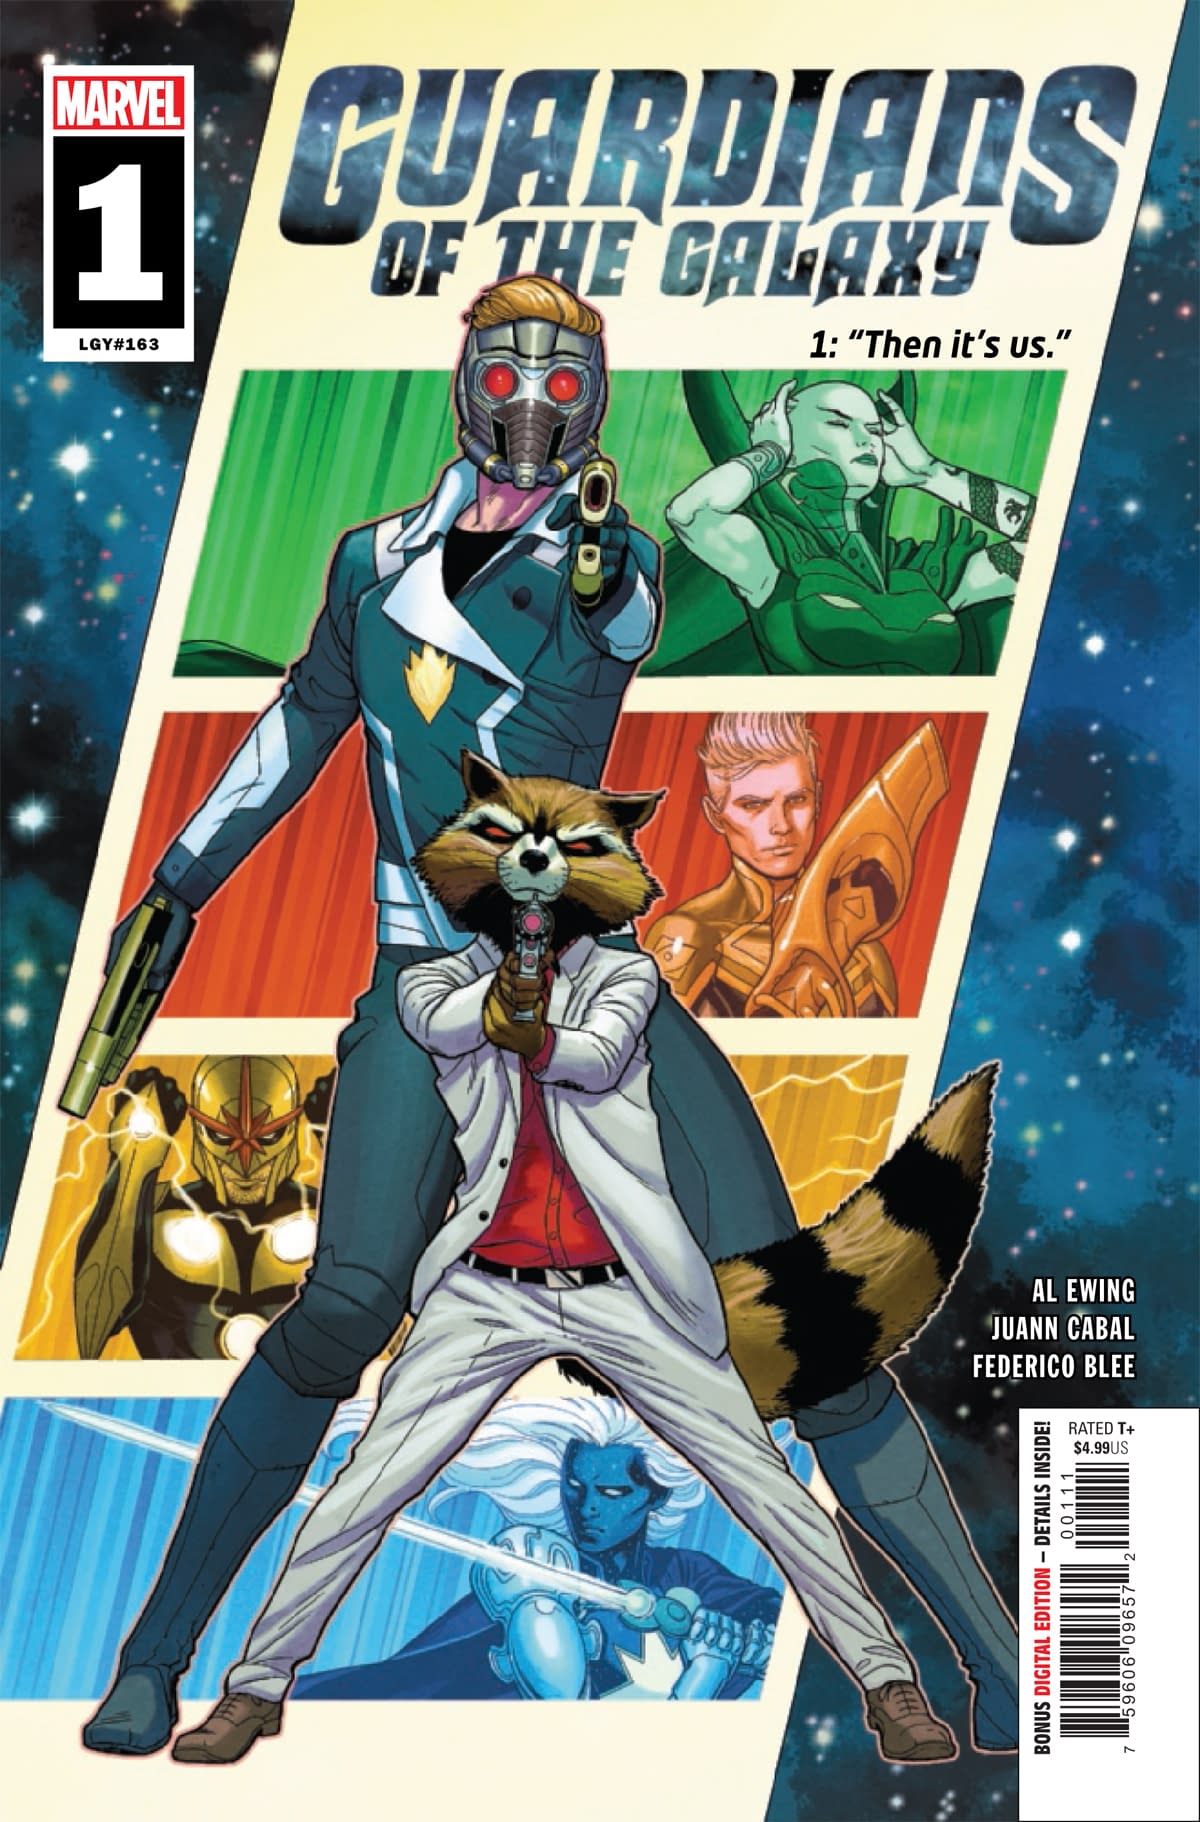 REVIEW: Guardians Of The Galaxy #1 -- "There's An Idiotic Kind Of Glee To This"